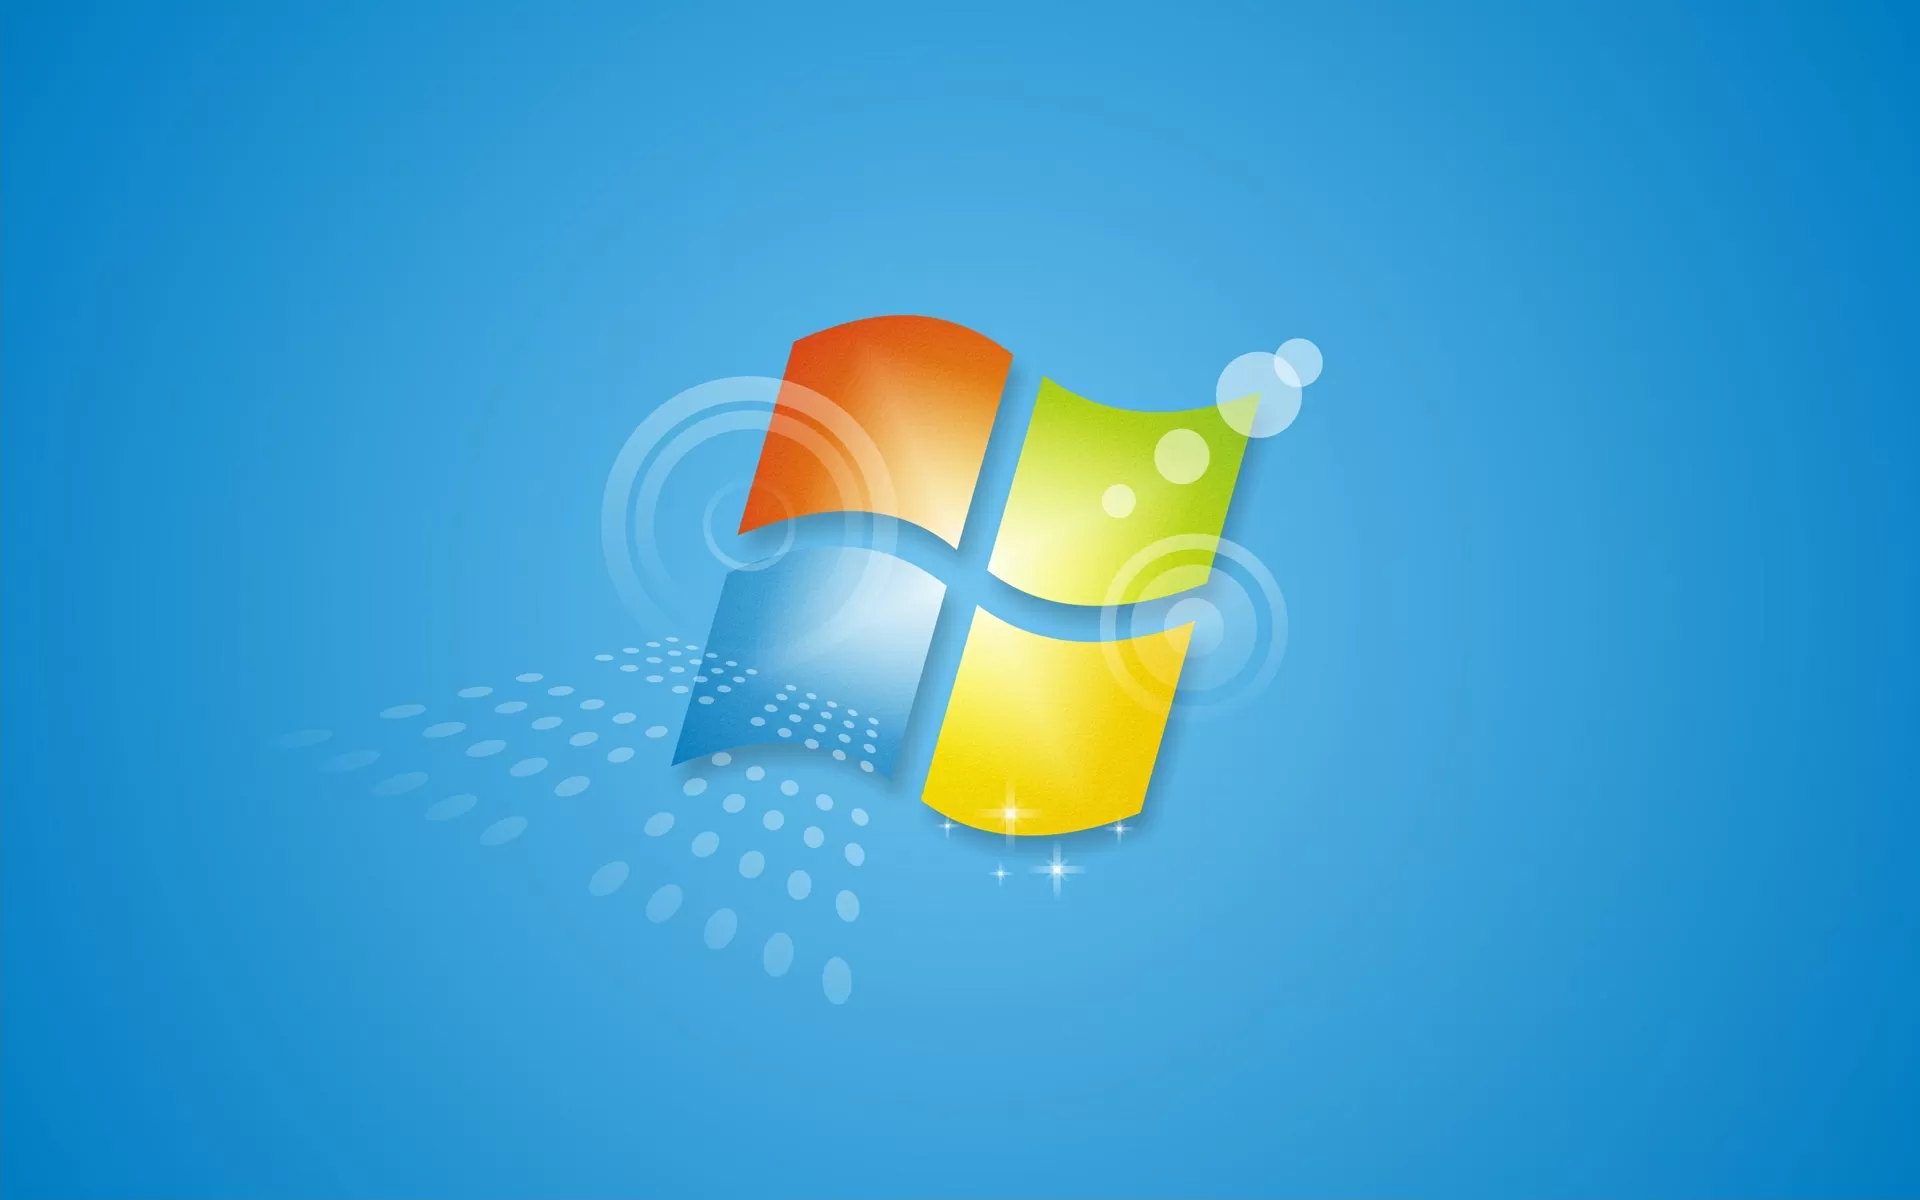 The final Windows 7 and 8 patch is here, adding secure boot to Windows 7 (kind of)